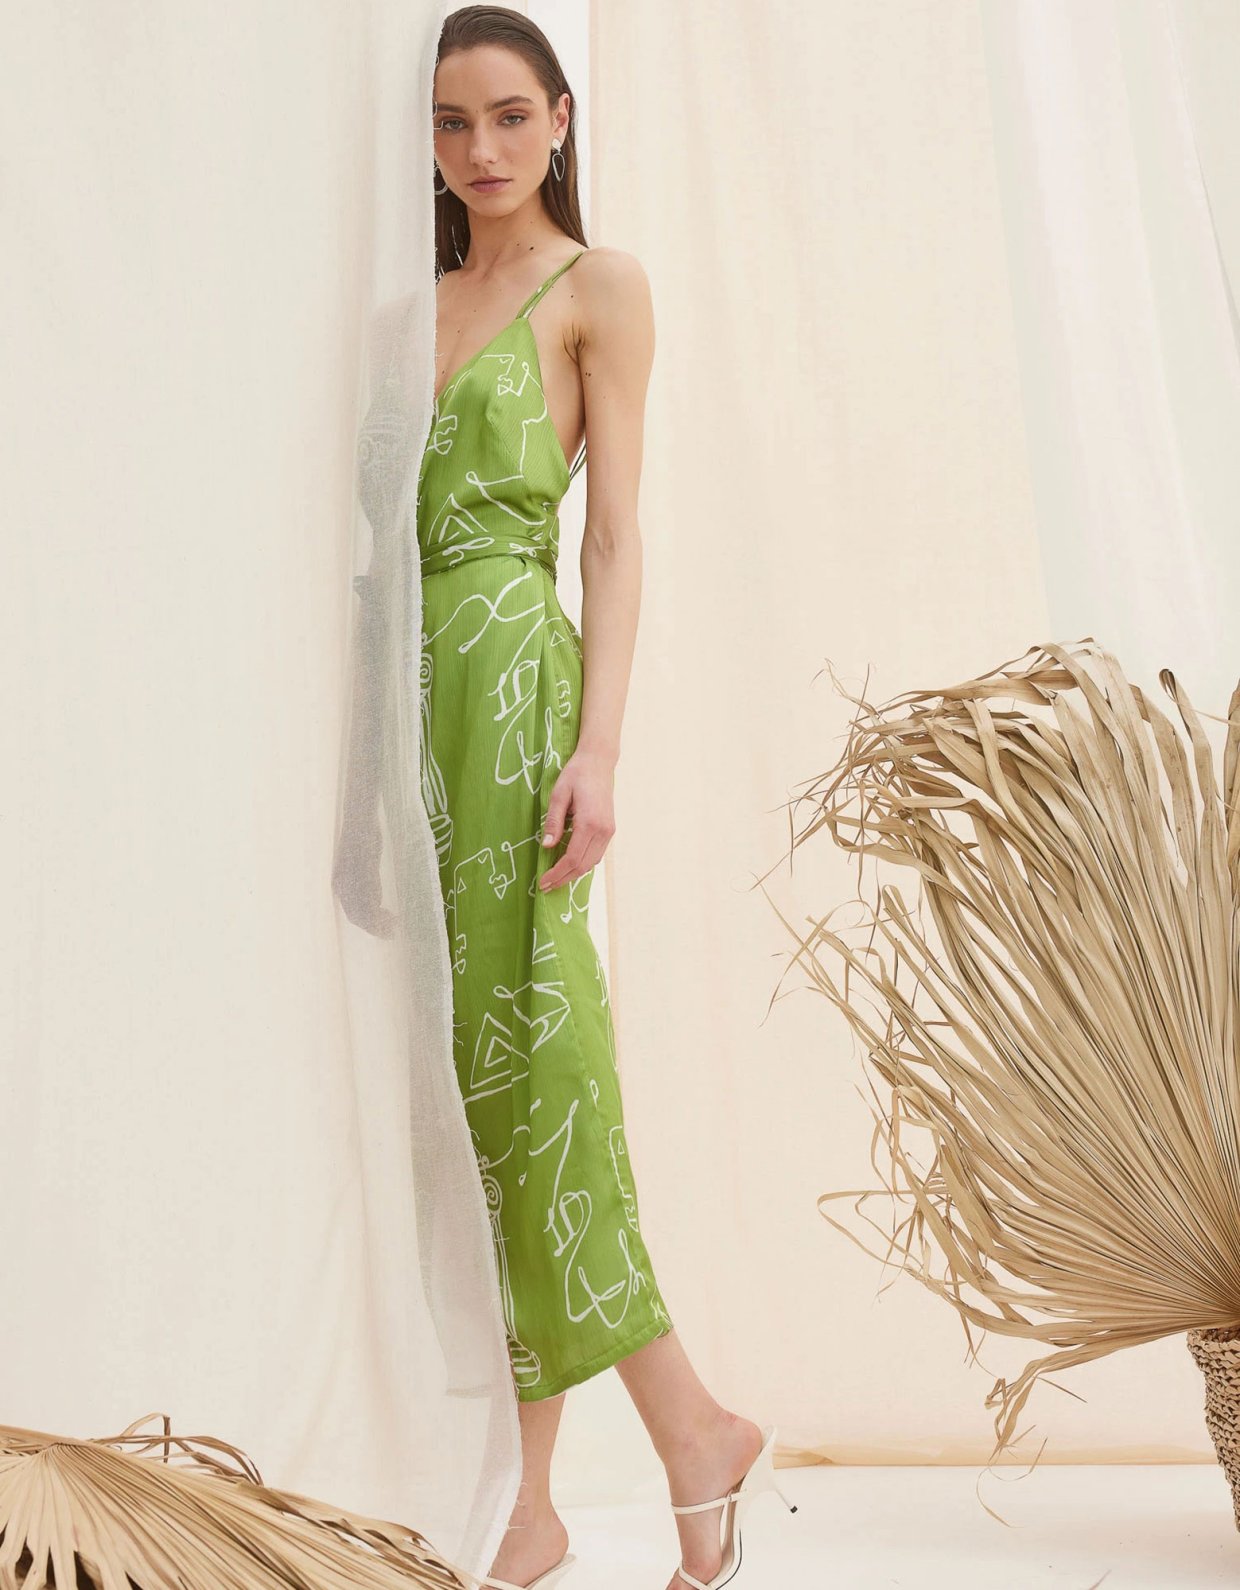 The Knl's Andromeda wrap lime line dress